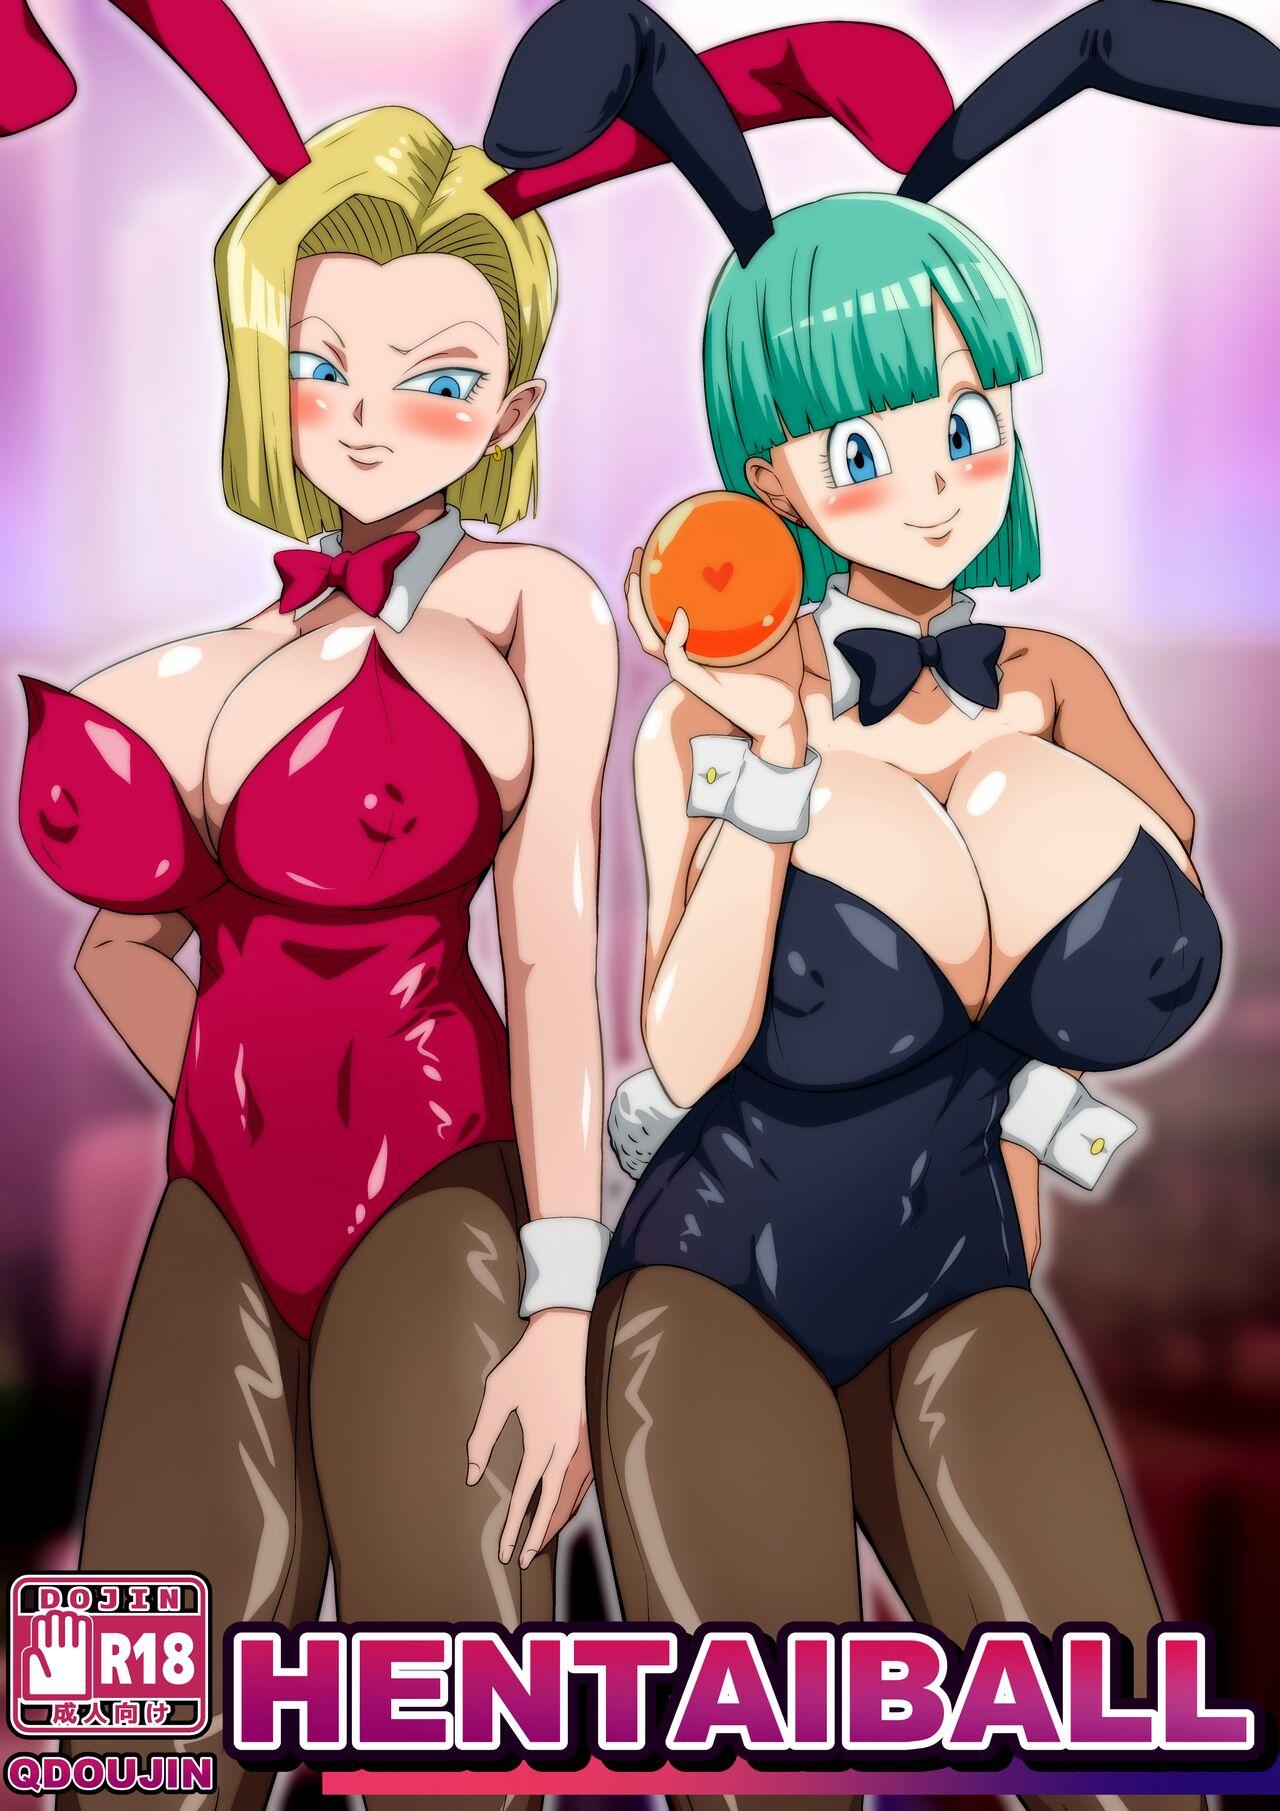 Dom HENTAIBALL - Dragon ball z Innocent - Picture 1